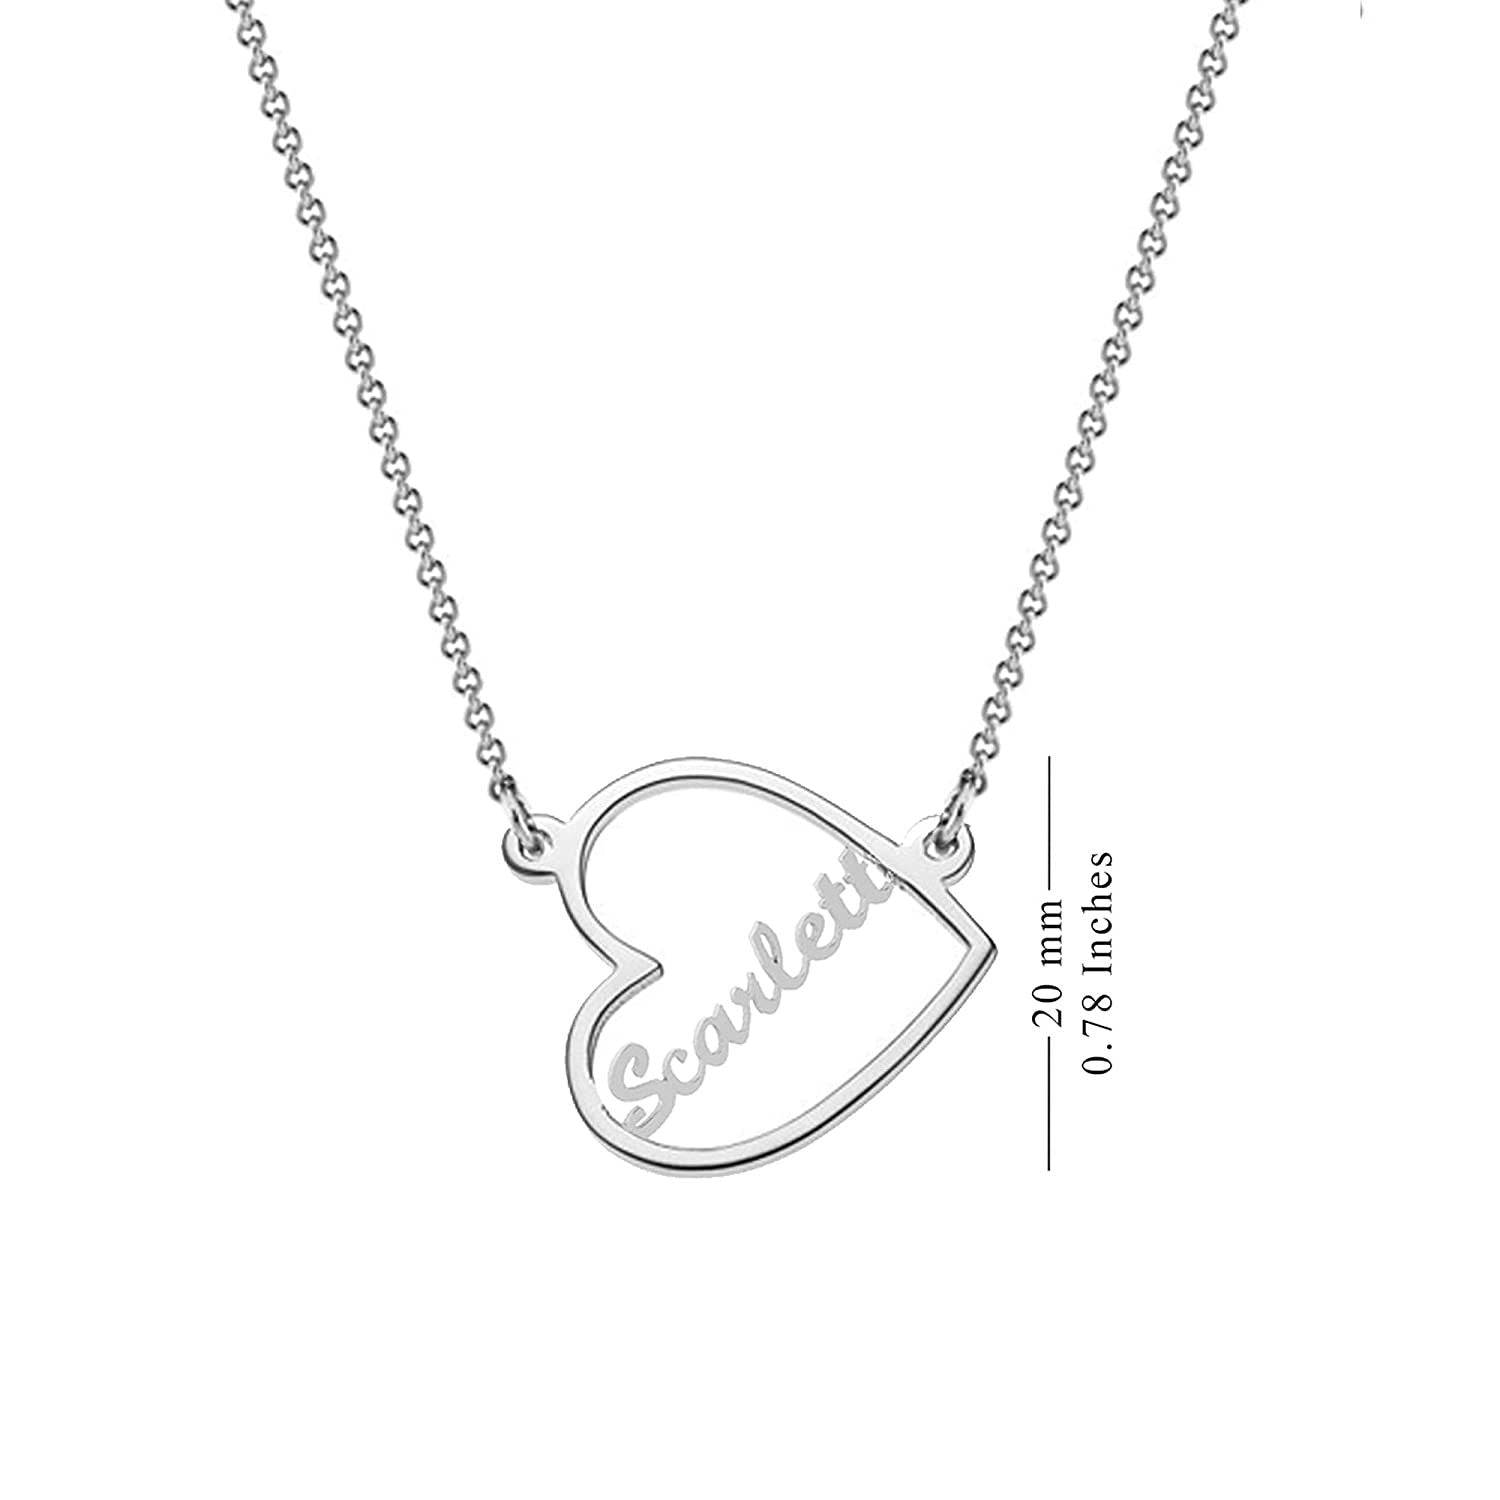 Personalised 925 Sterling Silver Open Heart Name Pendant Necklace for Teen Women